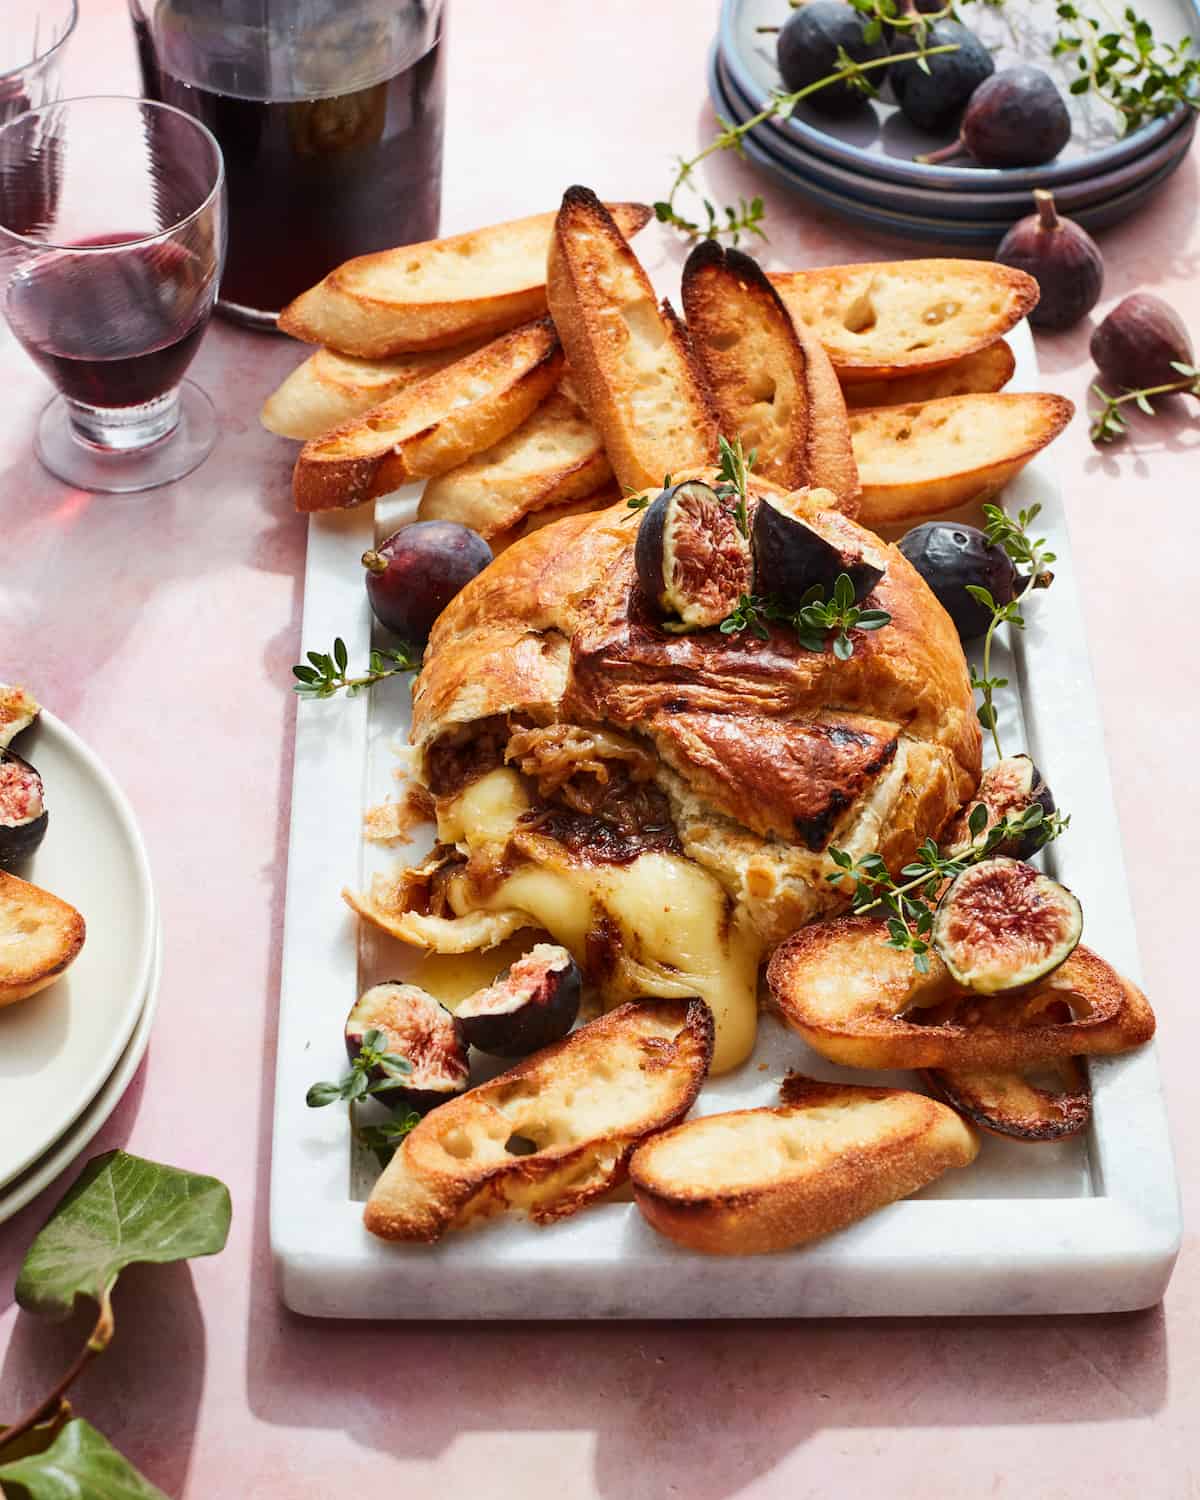 Baked brie topped with sliced figs and fresh herbs on a white marbled serving dish surrounded by bread slices and two stacked plates in the lower left hand corner and two glasses of red wine and a wine pitcher in the upper left hand corner and three small blue serving plates with whole figs in the upper right hand corner